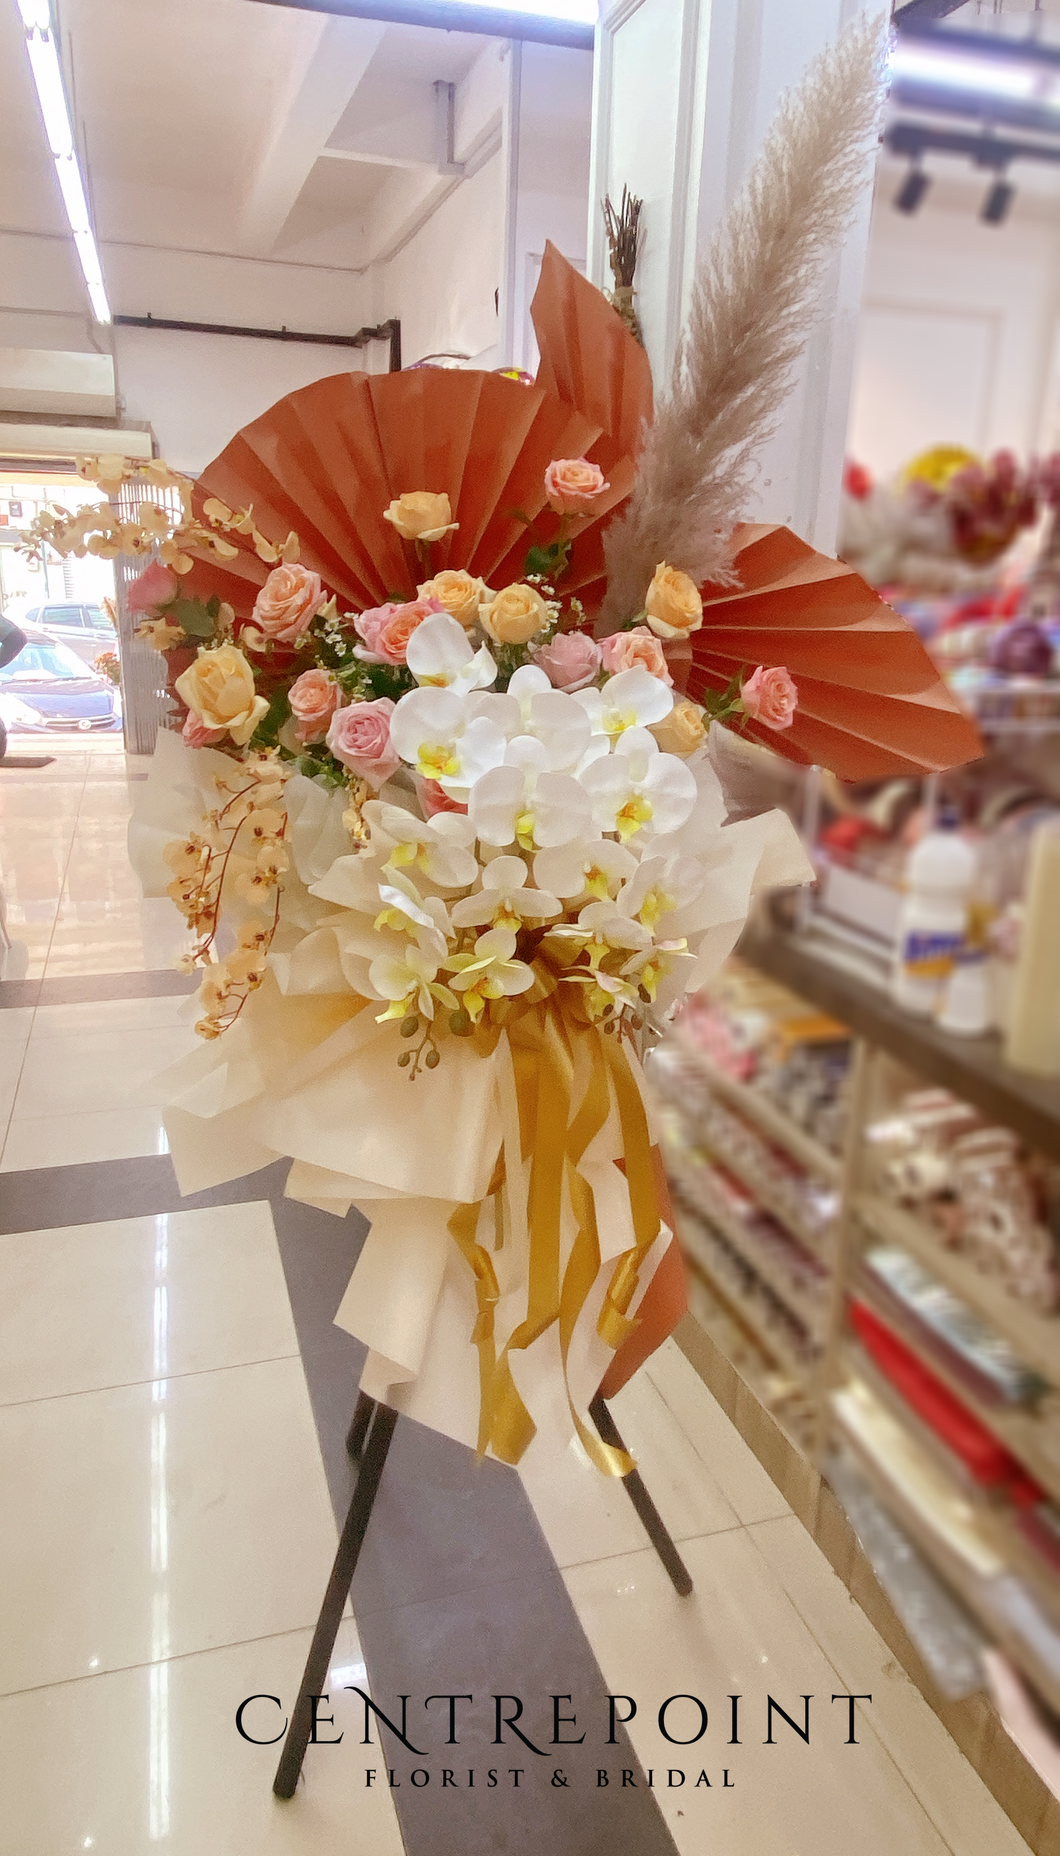 Opening Stand 201 - ARTIFICIAL FLOWER (RM 400.00)